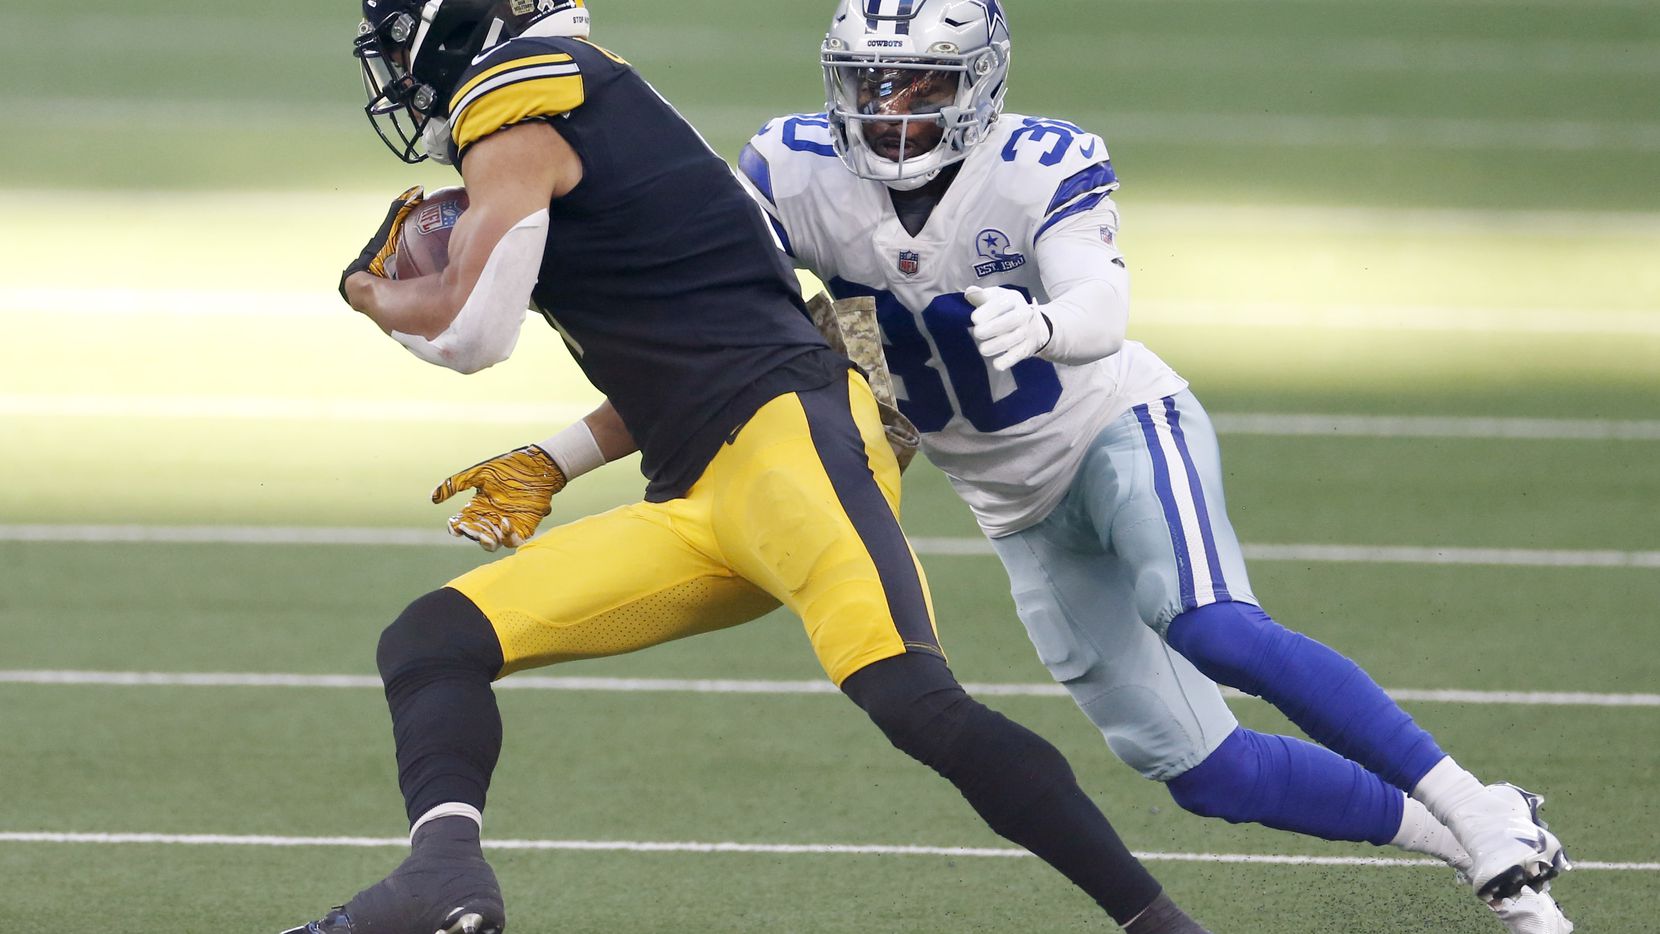 Dallas Cowboys cornerback Anthony Brown (30) prepares to tackle Pittsburgh Steelers wide receiver Chase Claypool (11) during the second quarter of play at AT&T Stadium in Arlington, Texas on Sunday, November 8, 2020.